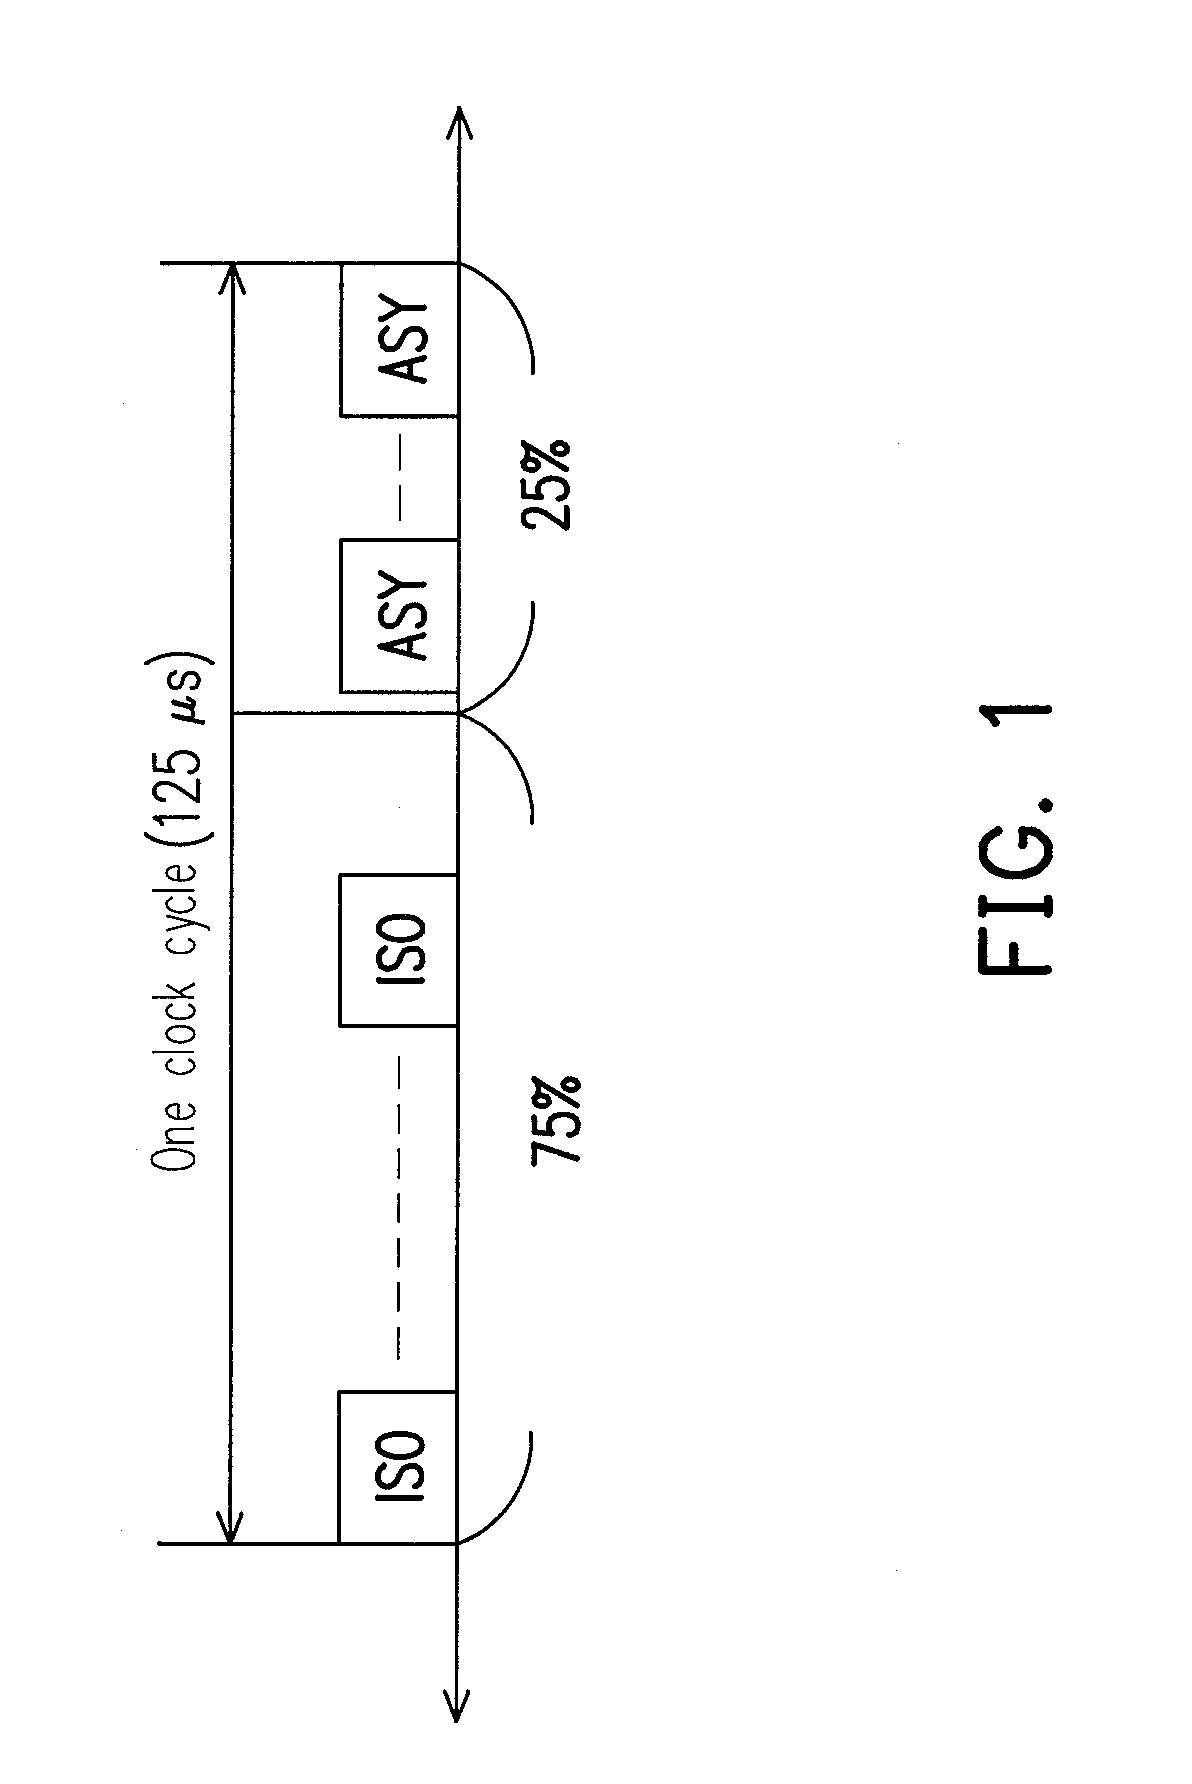 System and method for transmitting network packets adapted for multimedia streams